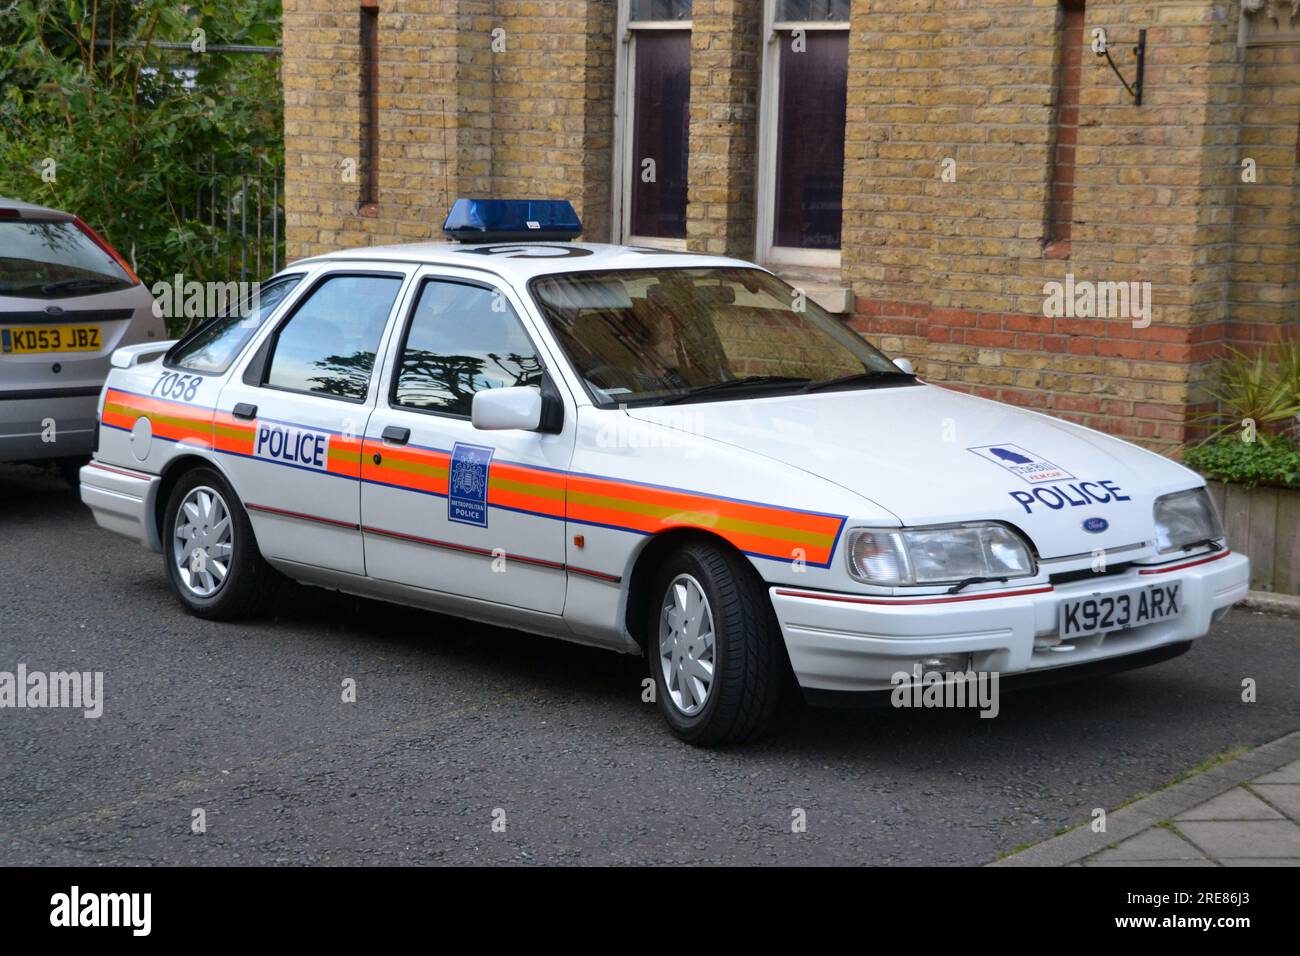 ARX Sierra One Car from The Bill TV Series at The Bill Reunion 1 Hosted by Misty Moon Events at The Cinema Museum, London - Sept 2017. Stock Photo